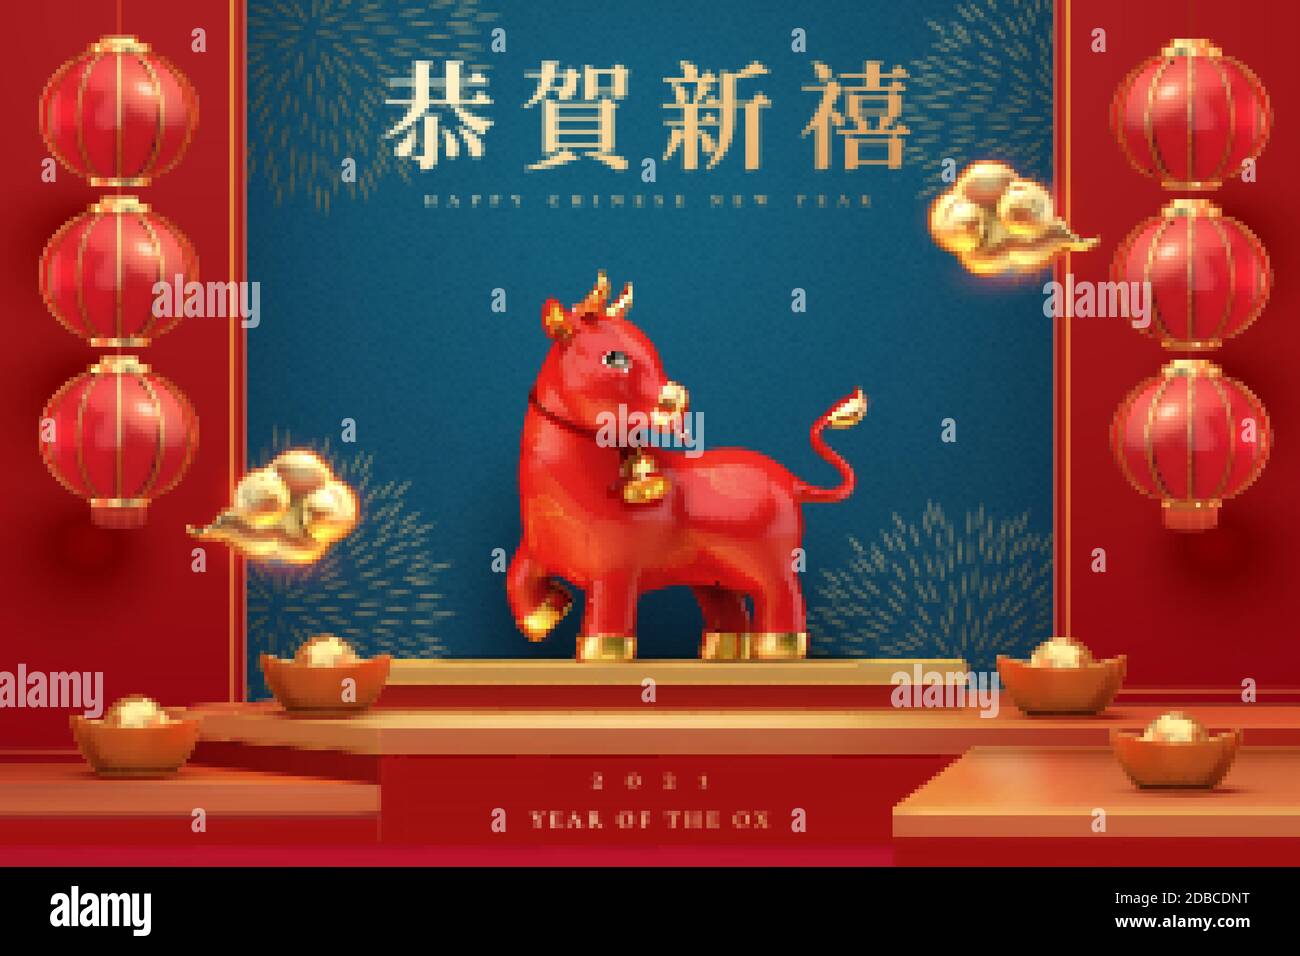 https://c8.alamy.com/comp/2DBCDNT/2021-year-of-the-ox-3d-illustration-design-red-lanterns-gold-ingots-decorations-showing-the-prosperity-of-the-upcoming-time-chinese-text-best-wish-2DBCDNT.jpg